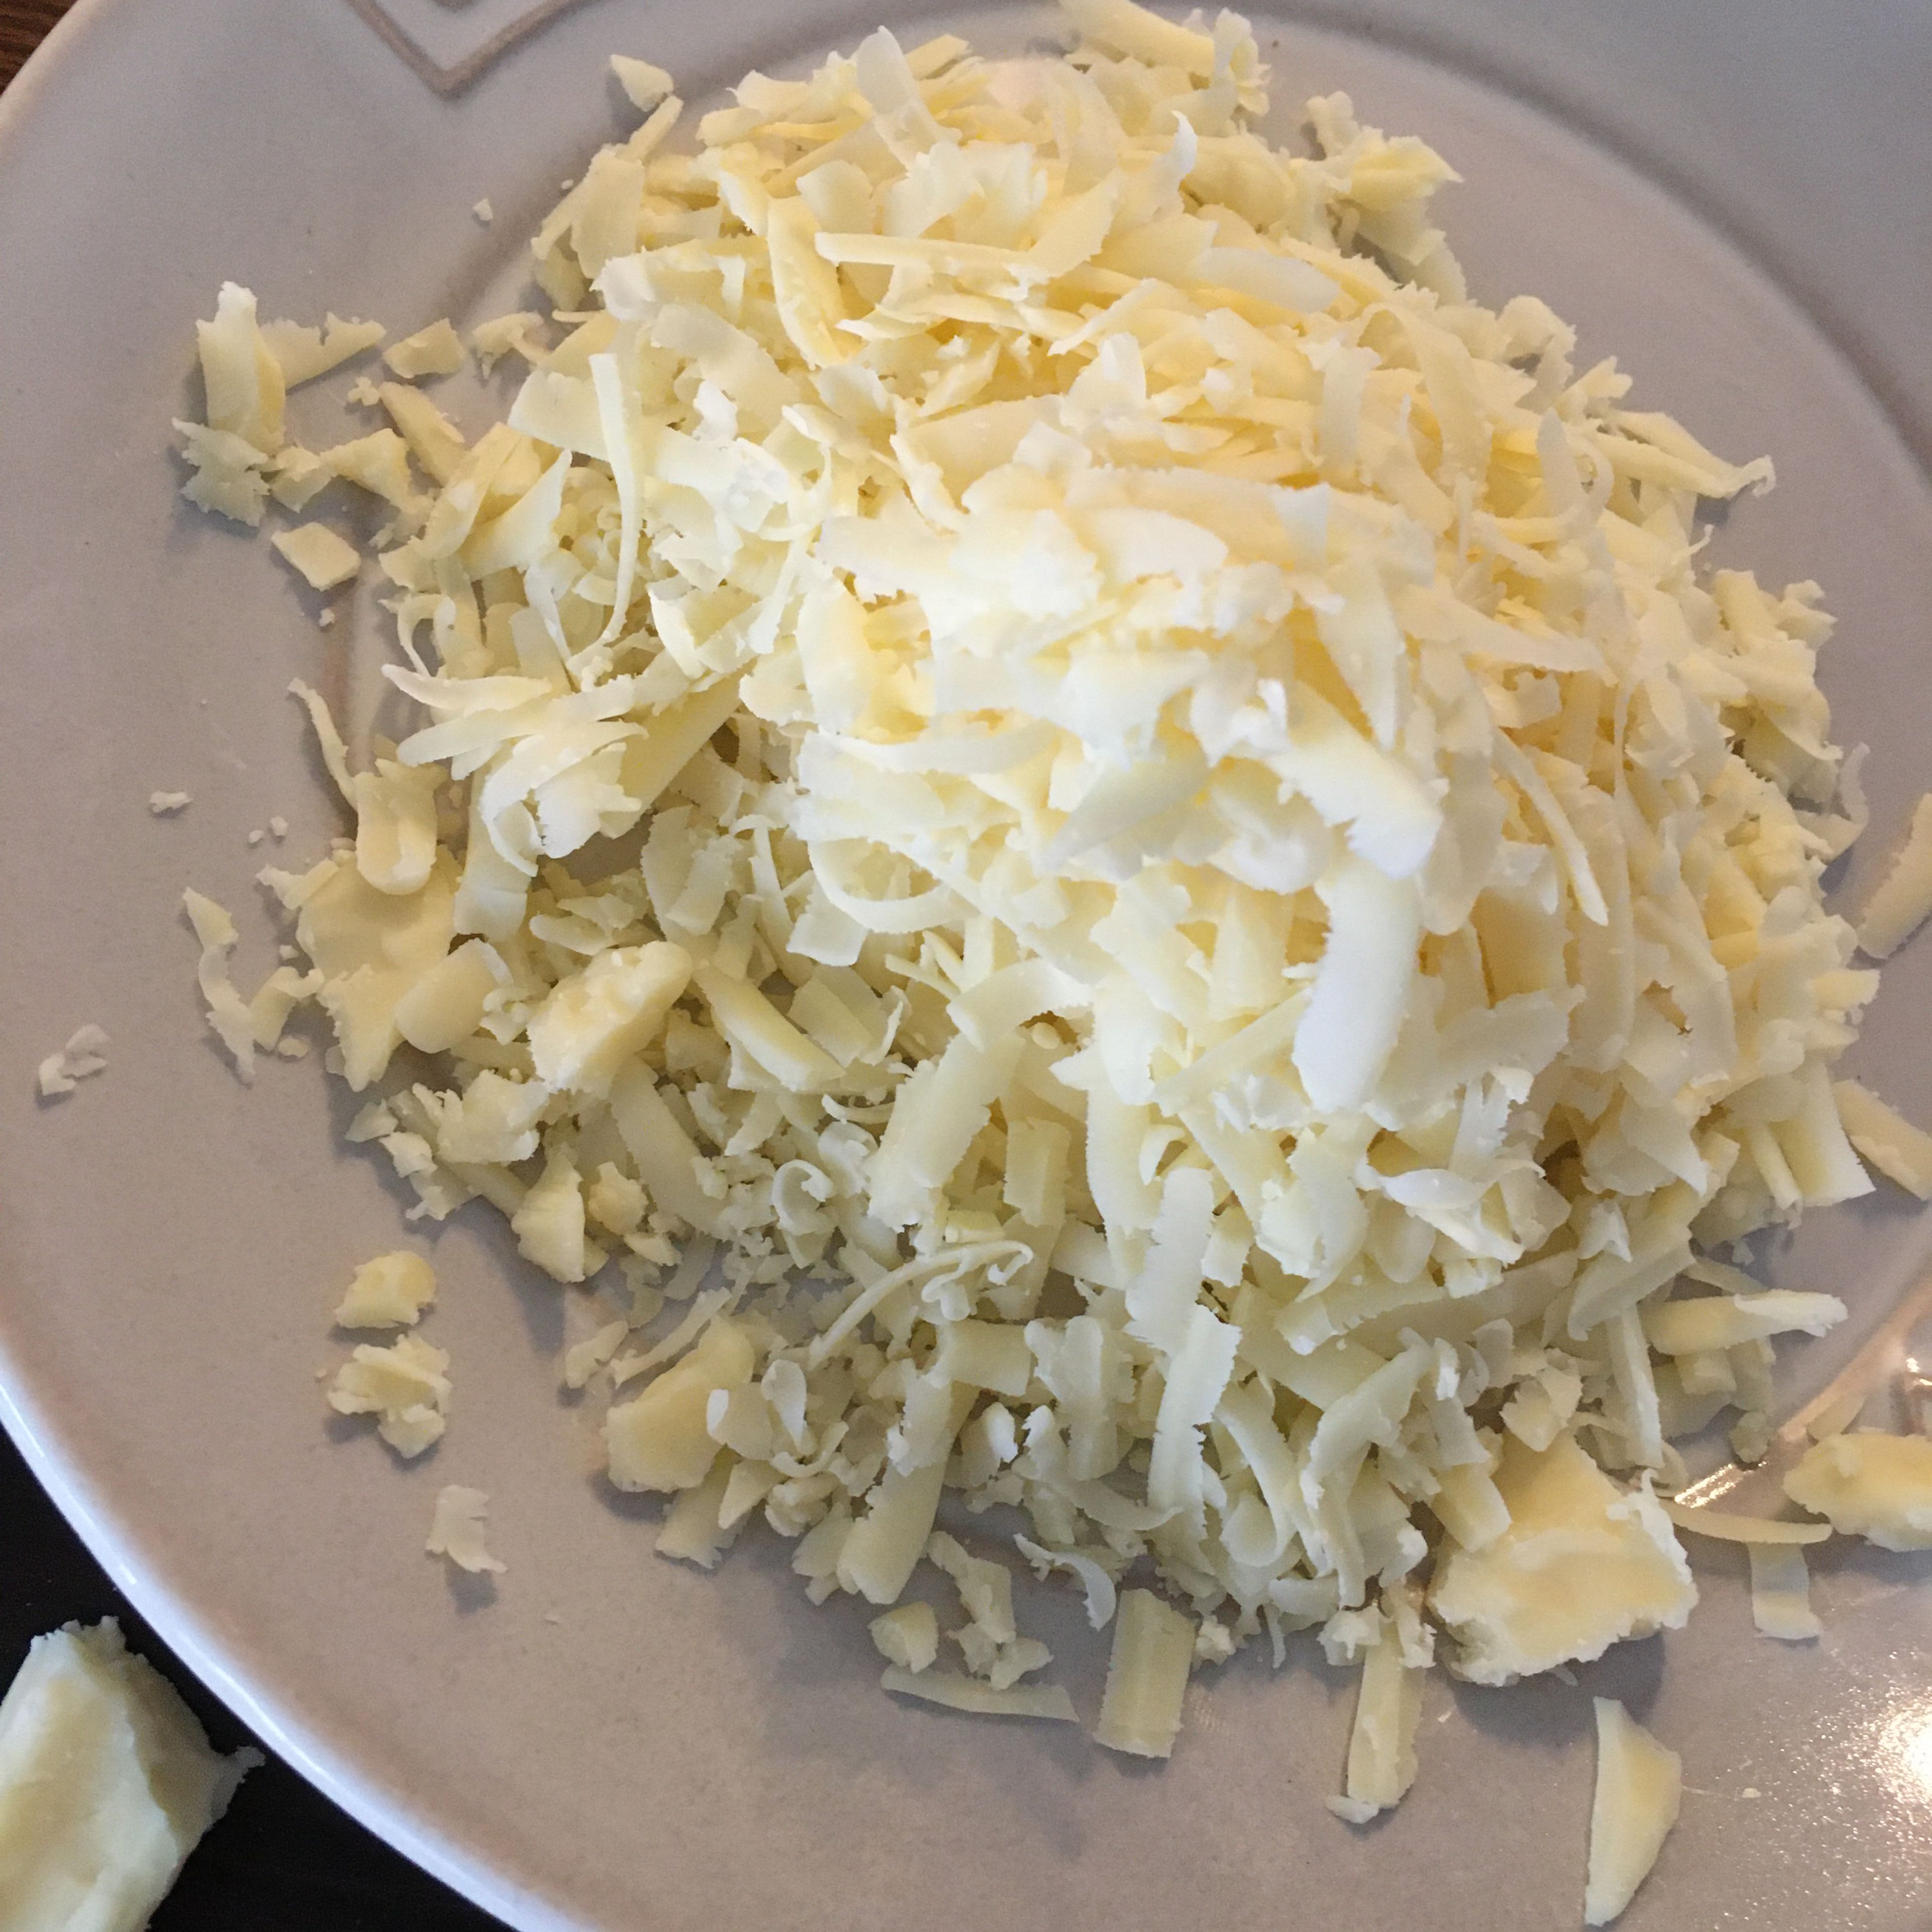 Add 2/3 of the cheddar and add all of the Parmesan.